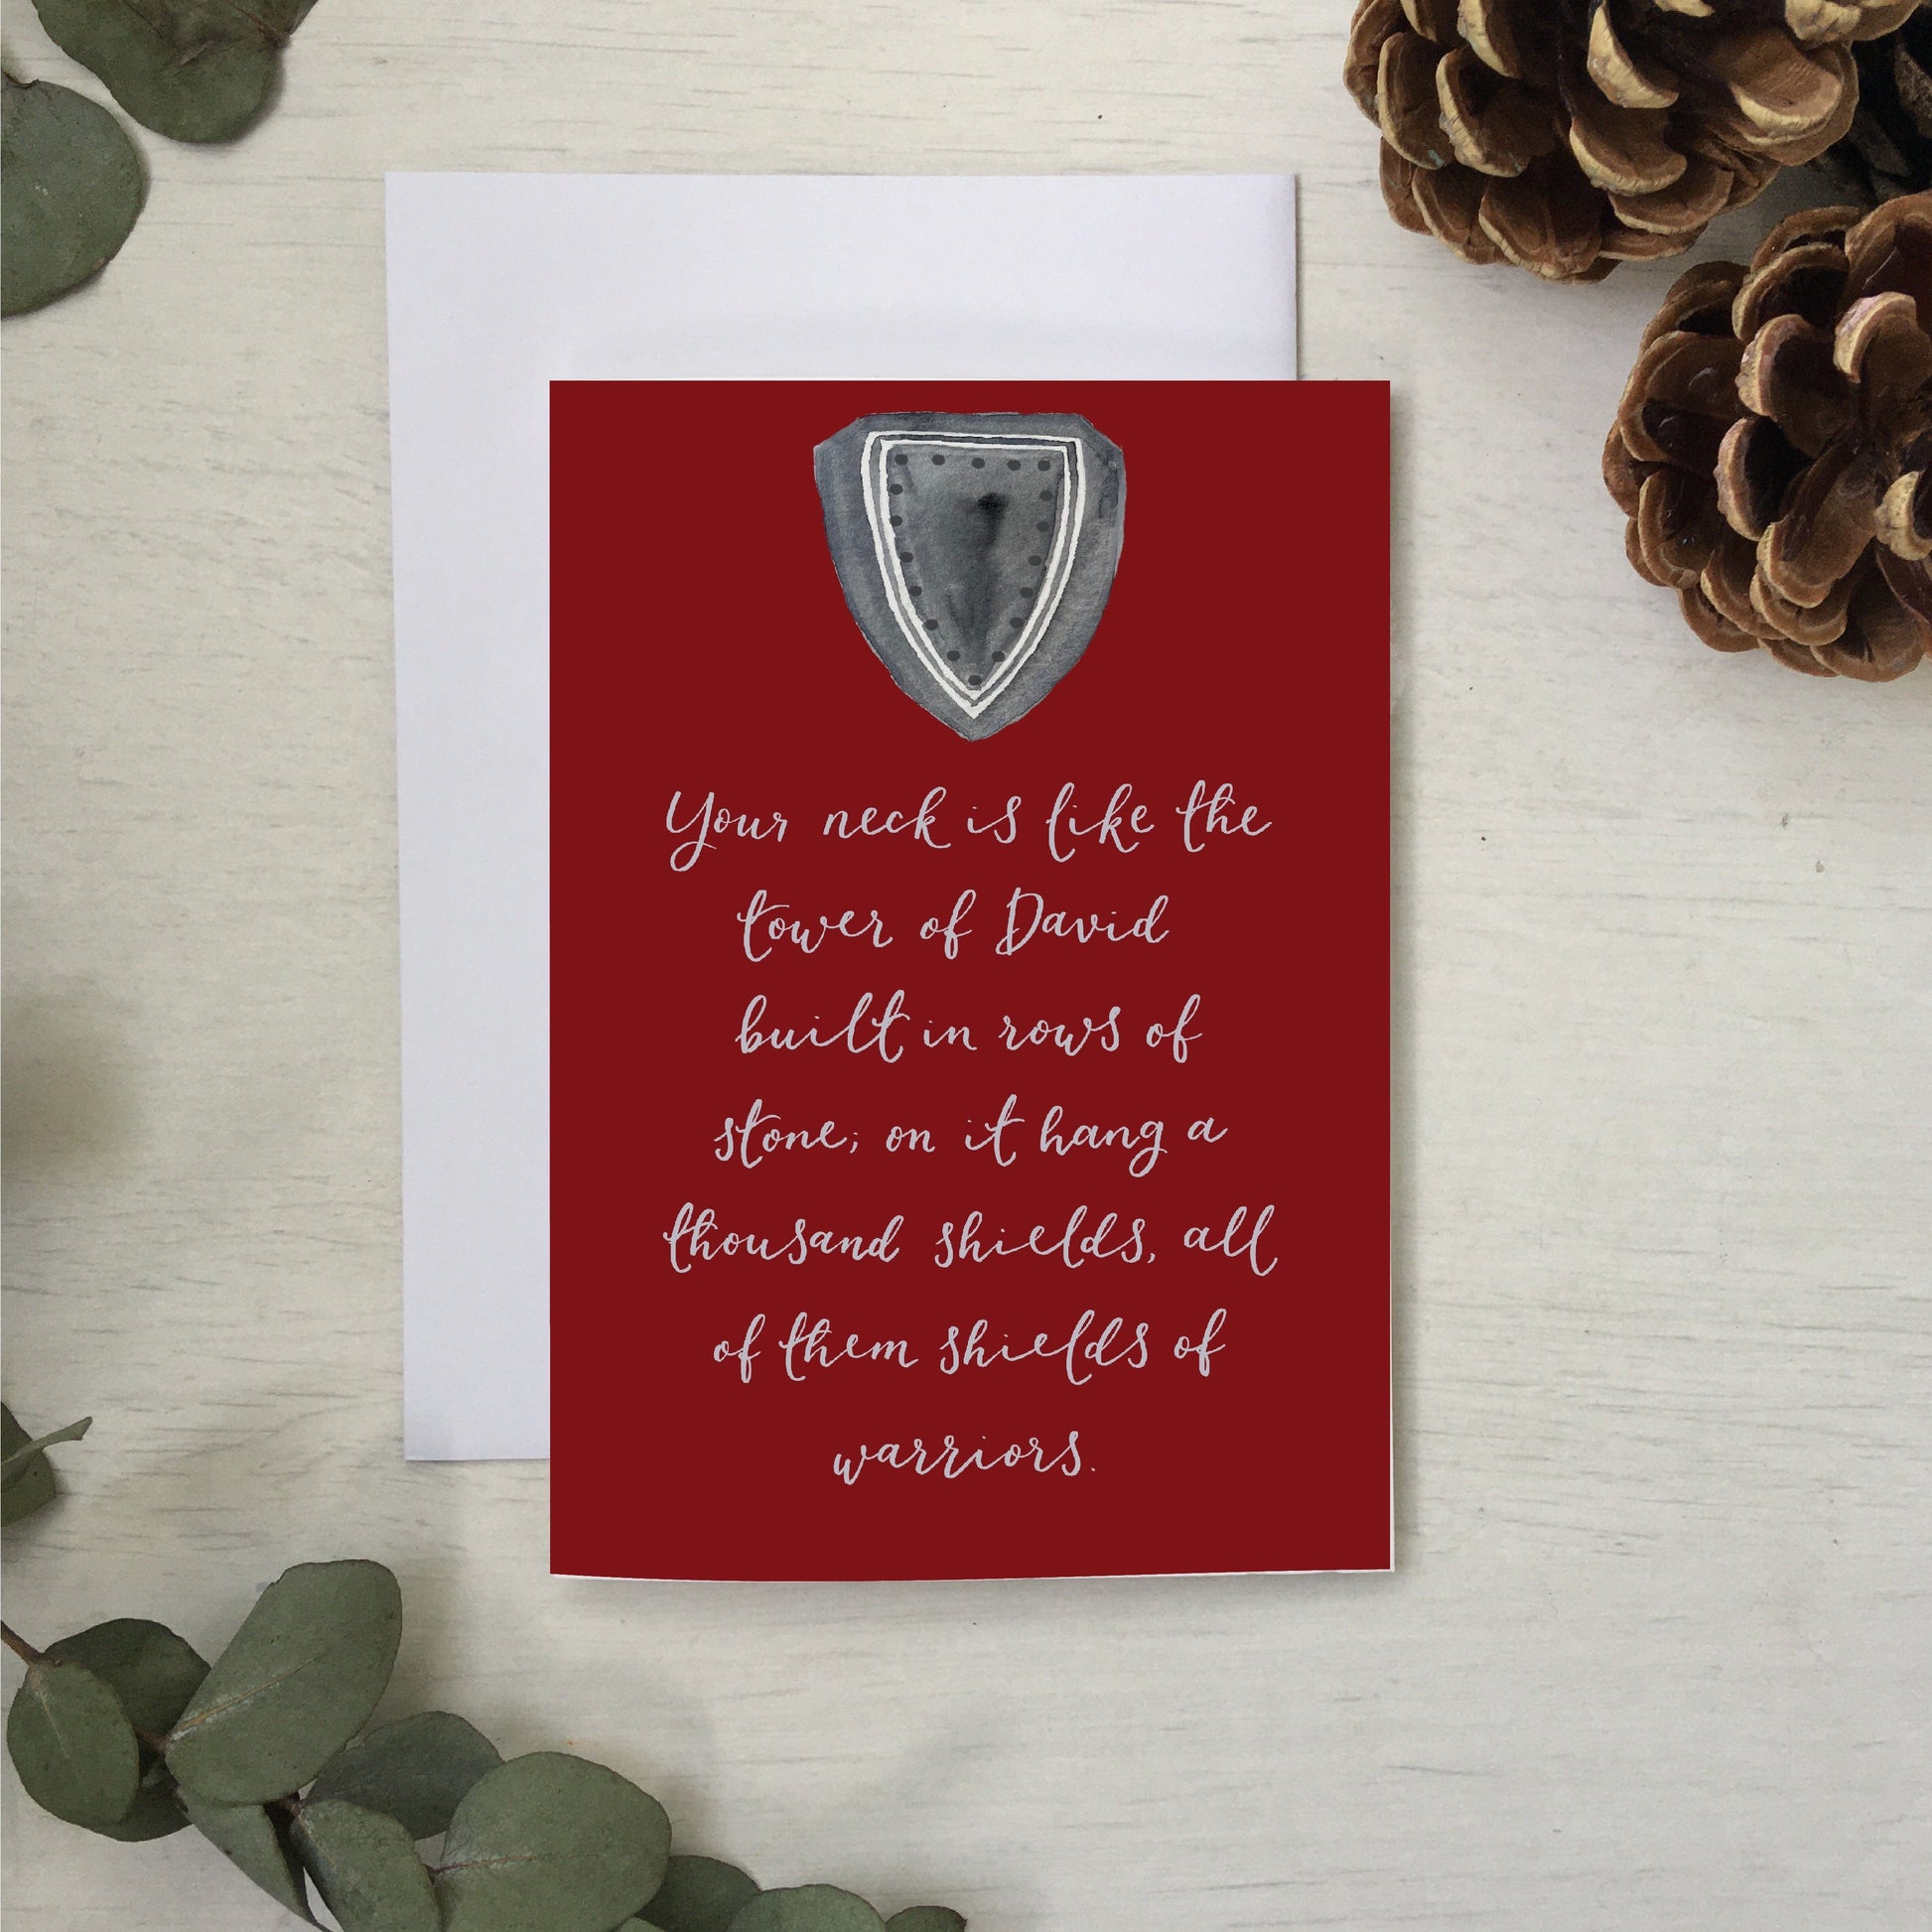 Humourous Christian Valentine's Day Card for men Cards And Hope Designs   